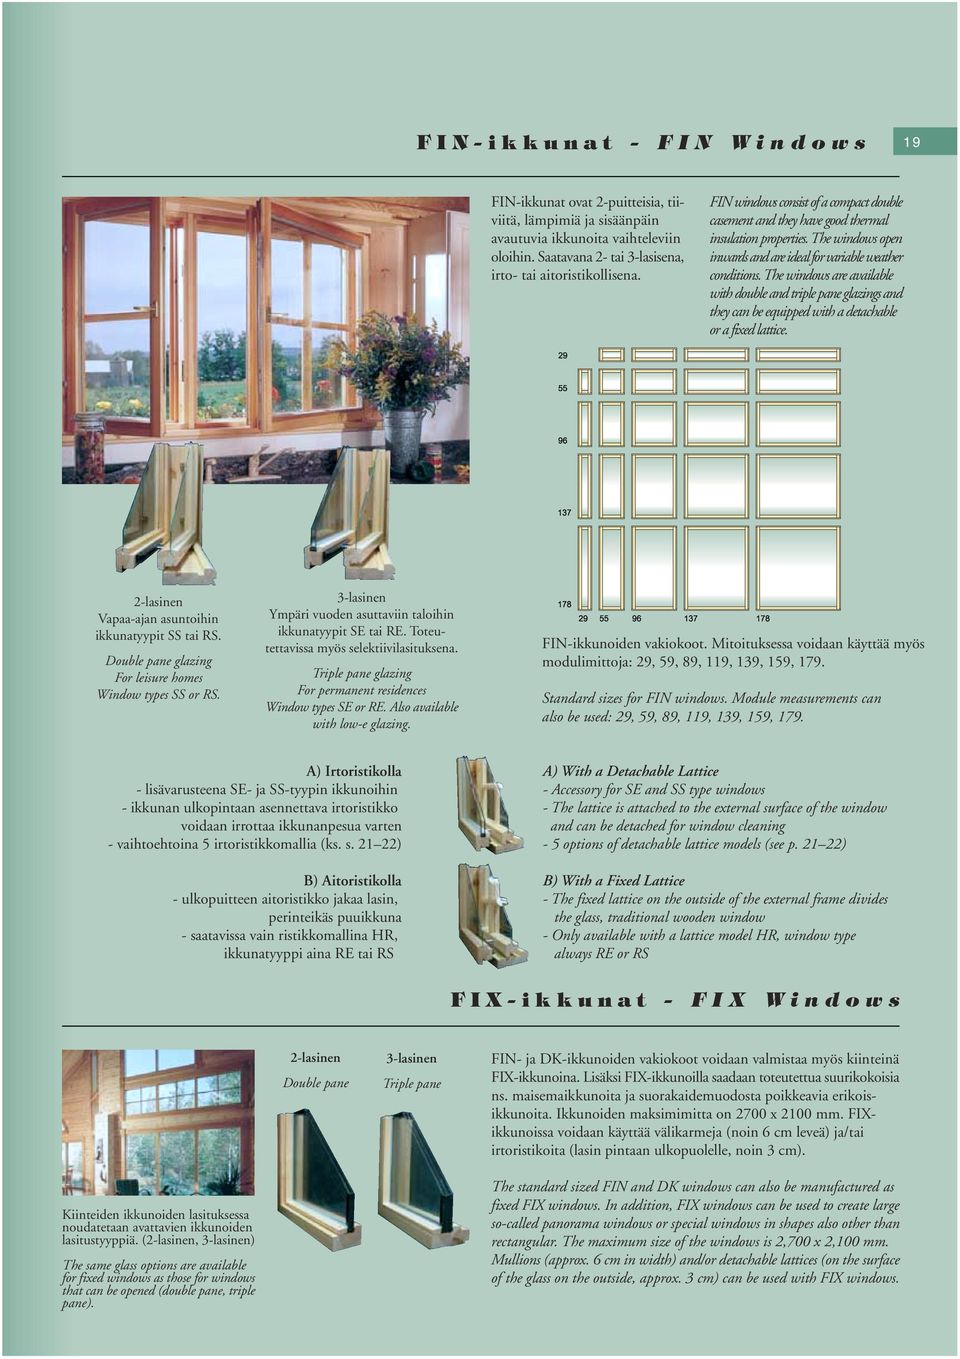 The windows are available with double and triple pane glazings and they can be equipped with a detachable or a fixed lattice. 2-lasinen Vapaa-ajan asuntoihin ikkunatyypit SS tai RS.